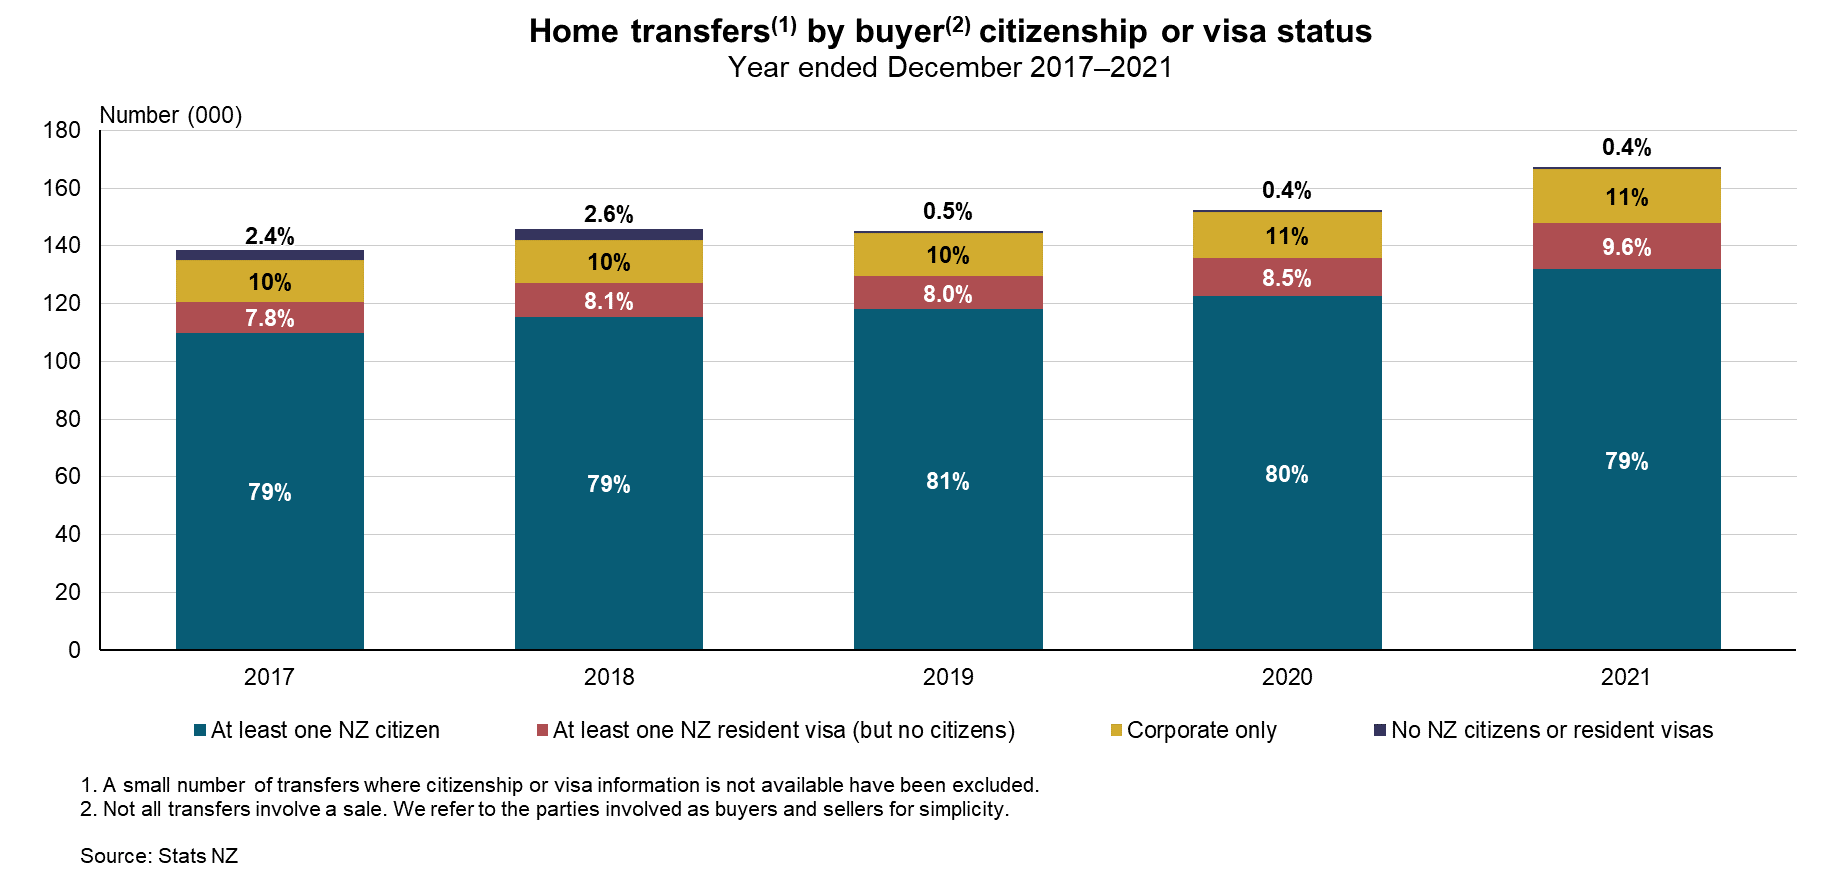 Image of graph, home transfers by buyer citizenship or visa status, year ended December 2017-2021. 